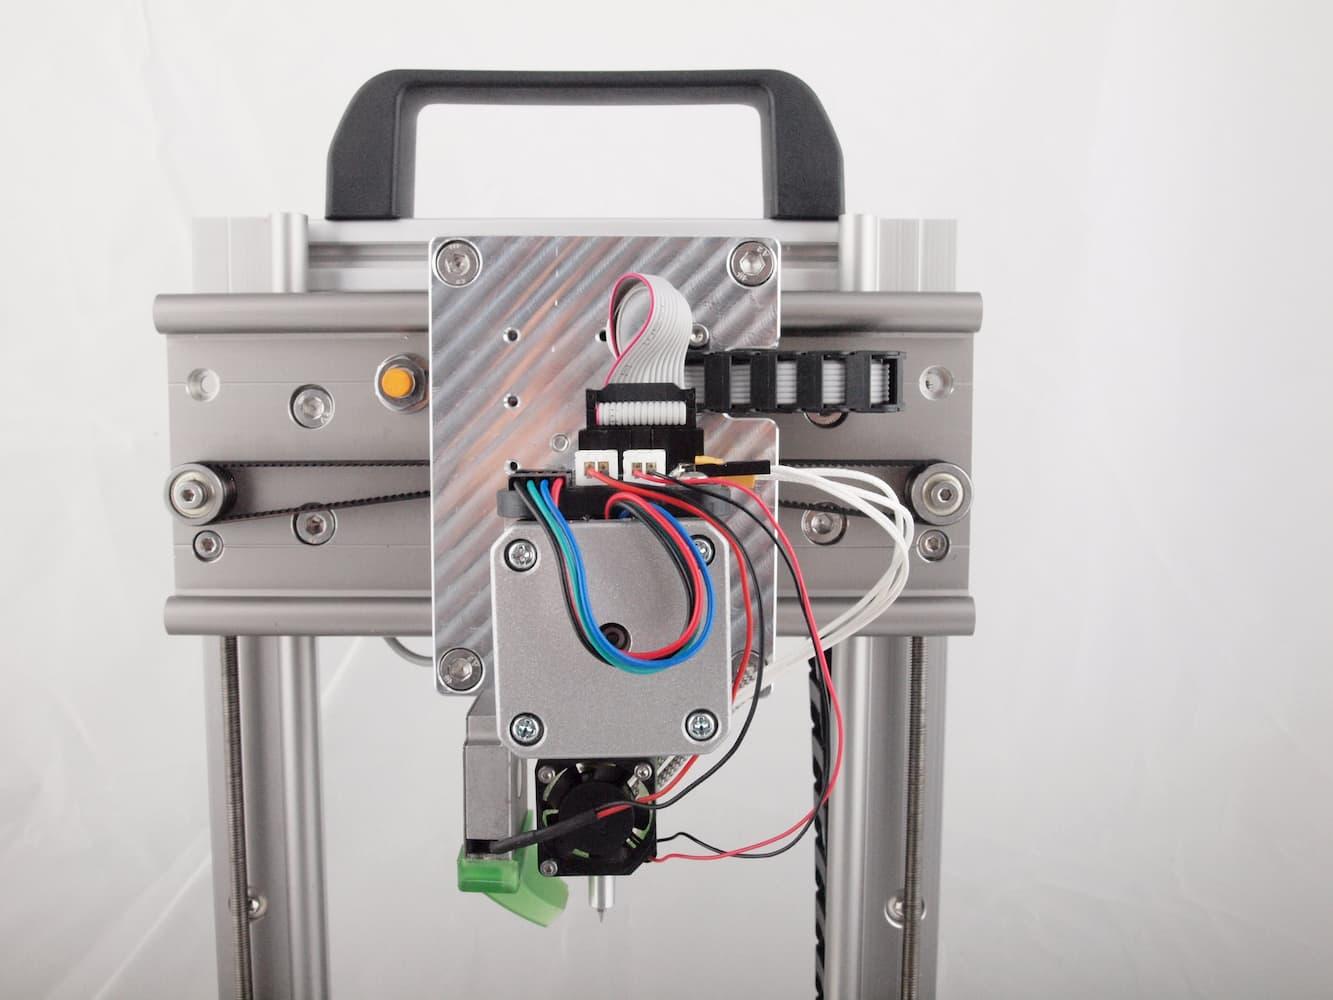 A compact, high-precision and silent 3D printer